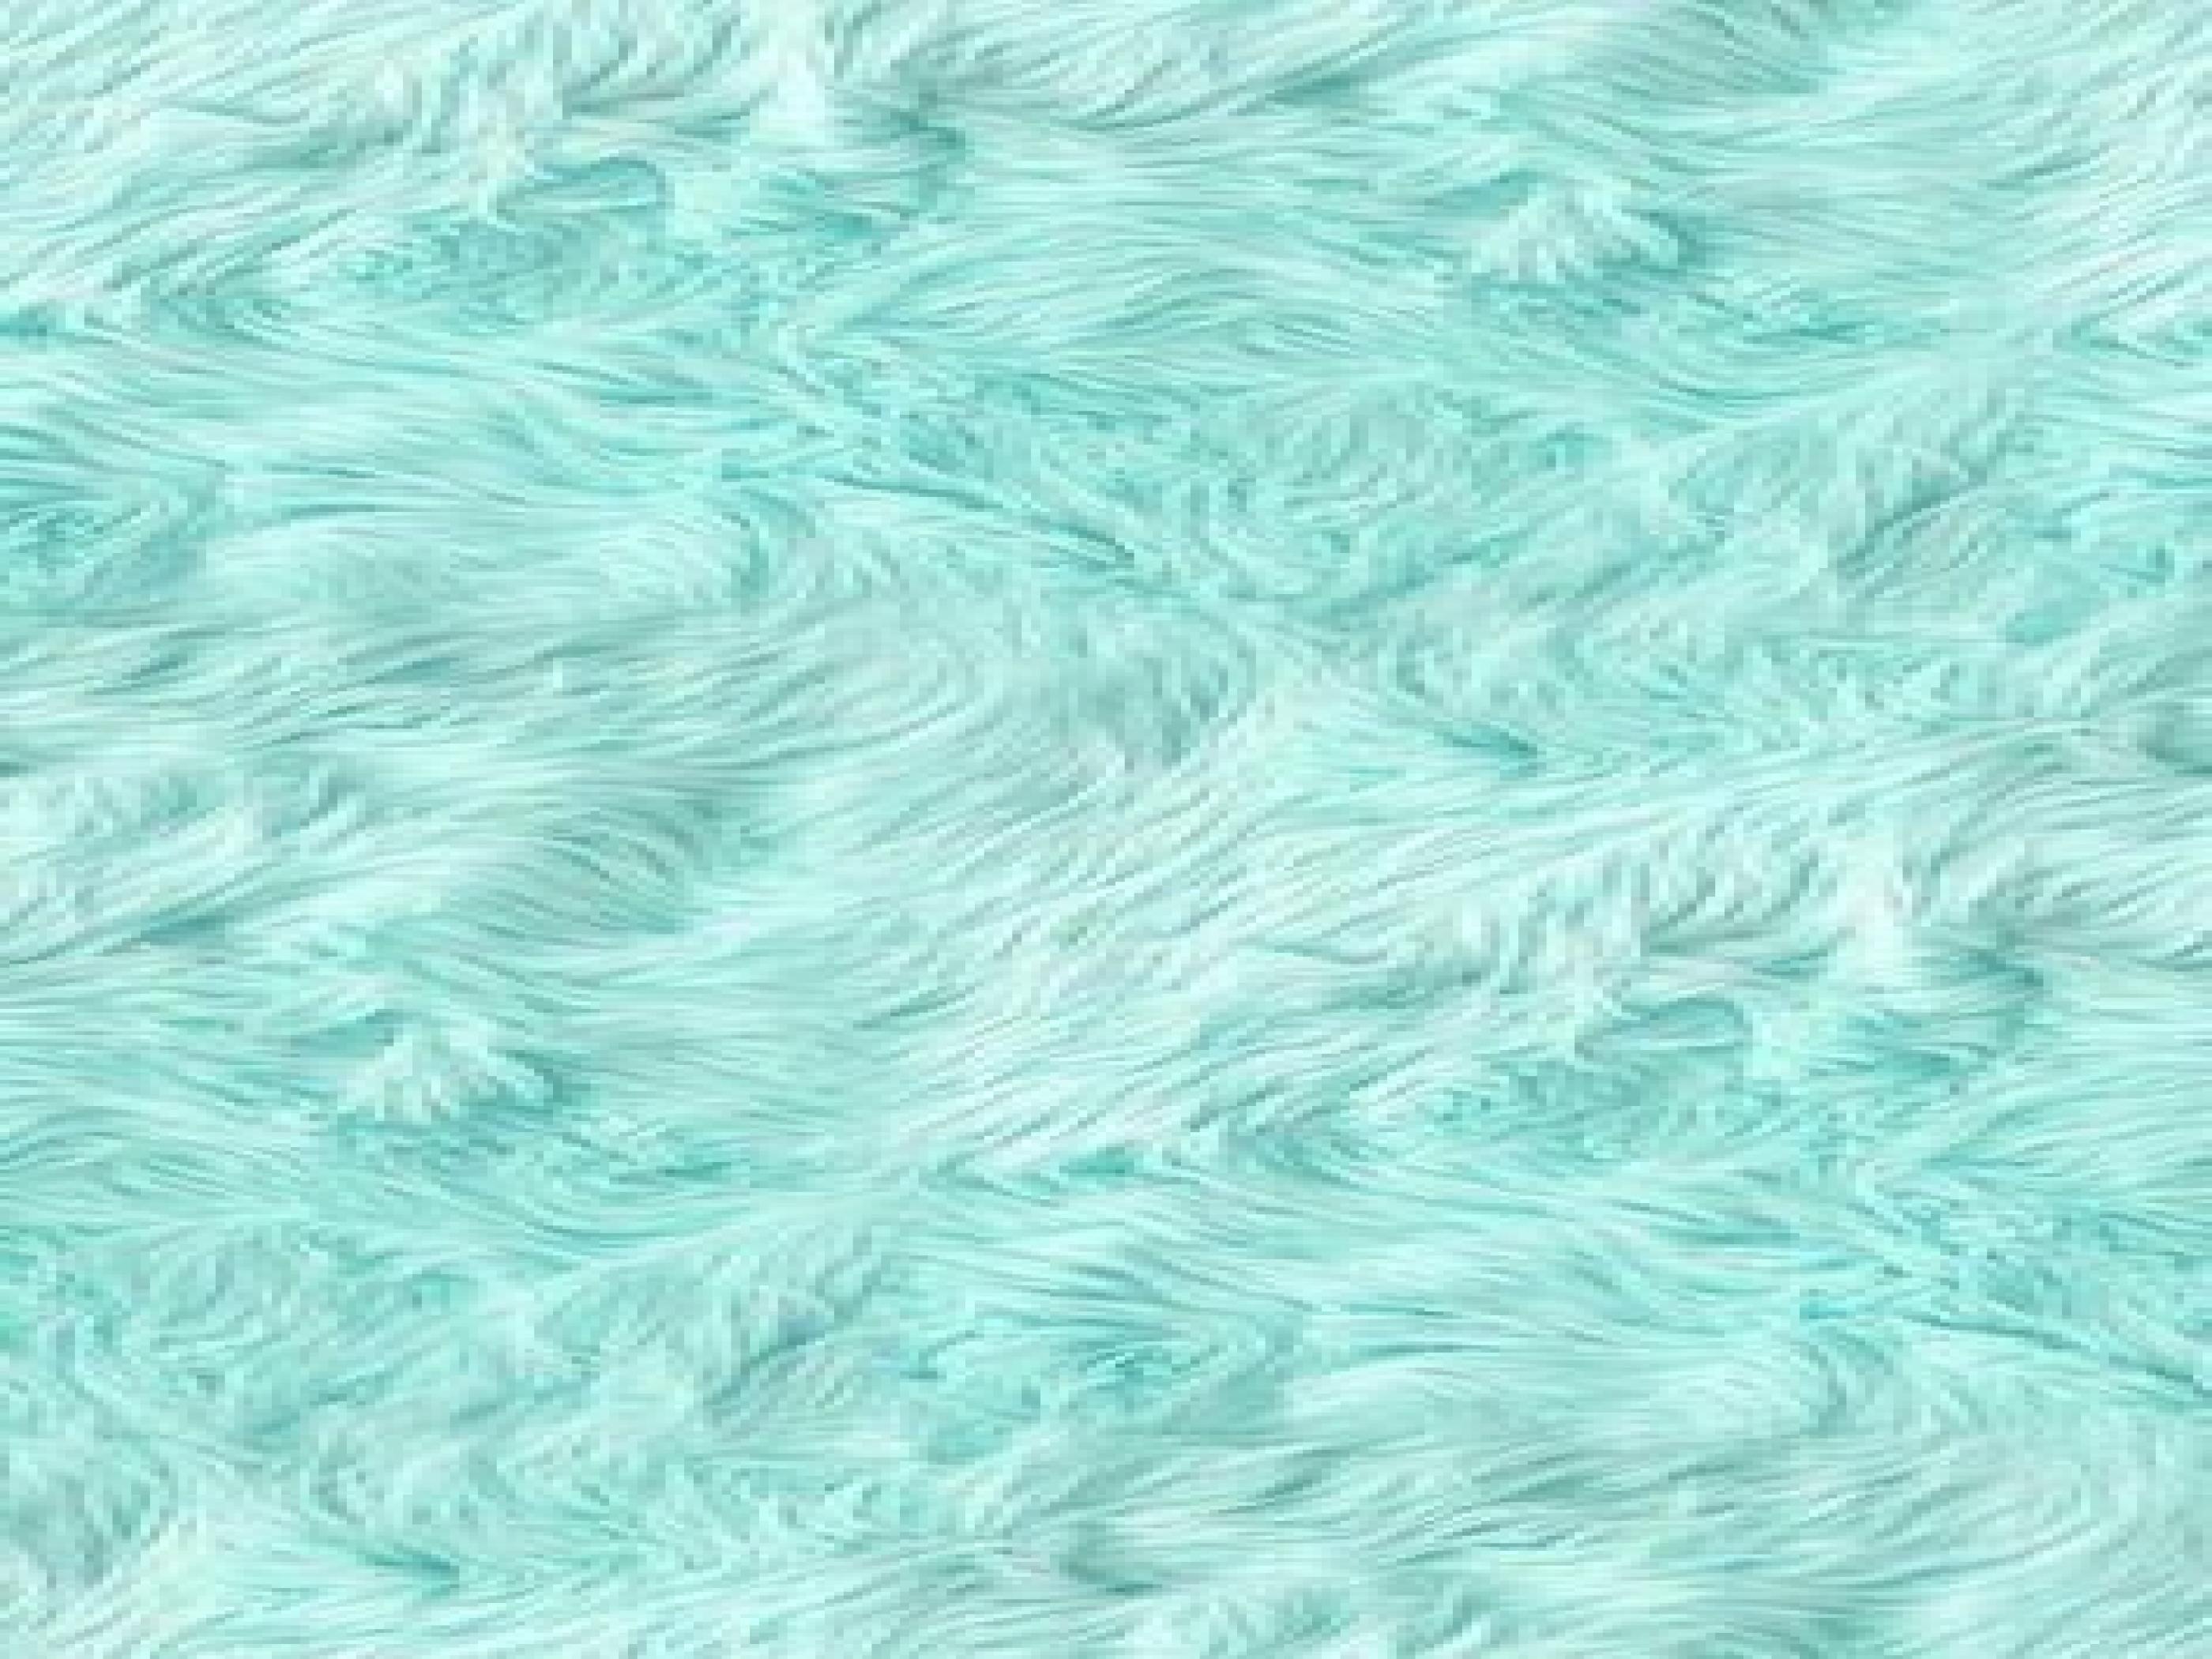 A blue and white fur texture - Teal, turquoise